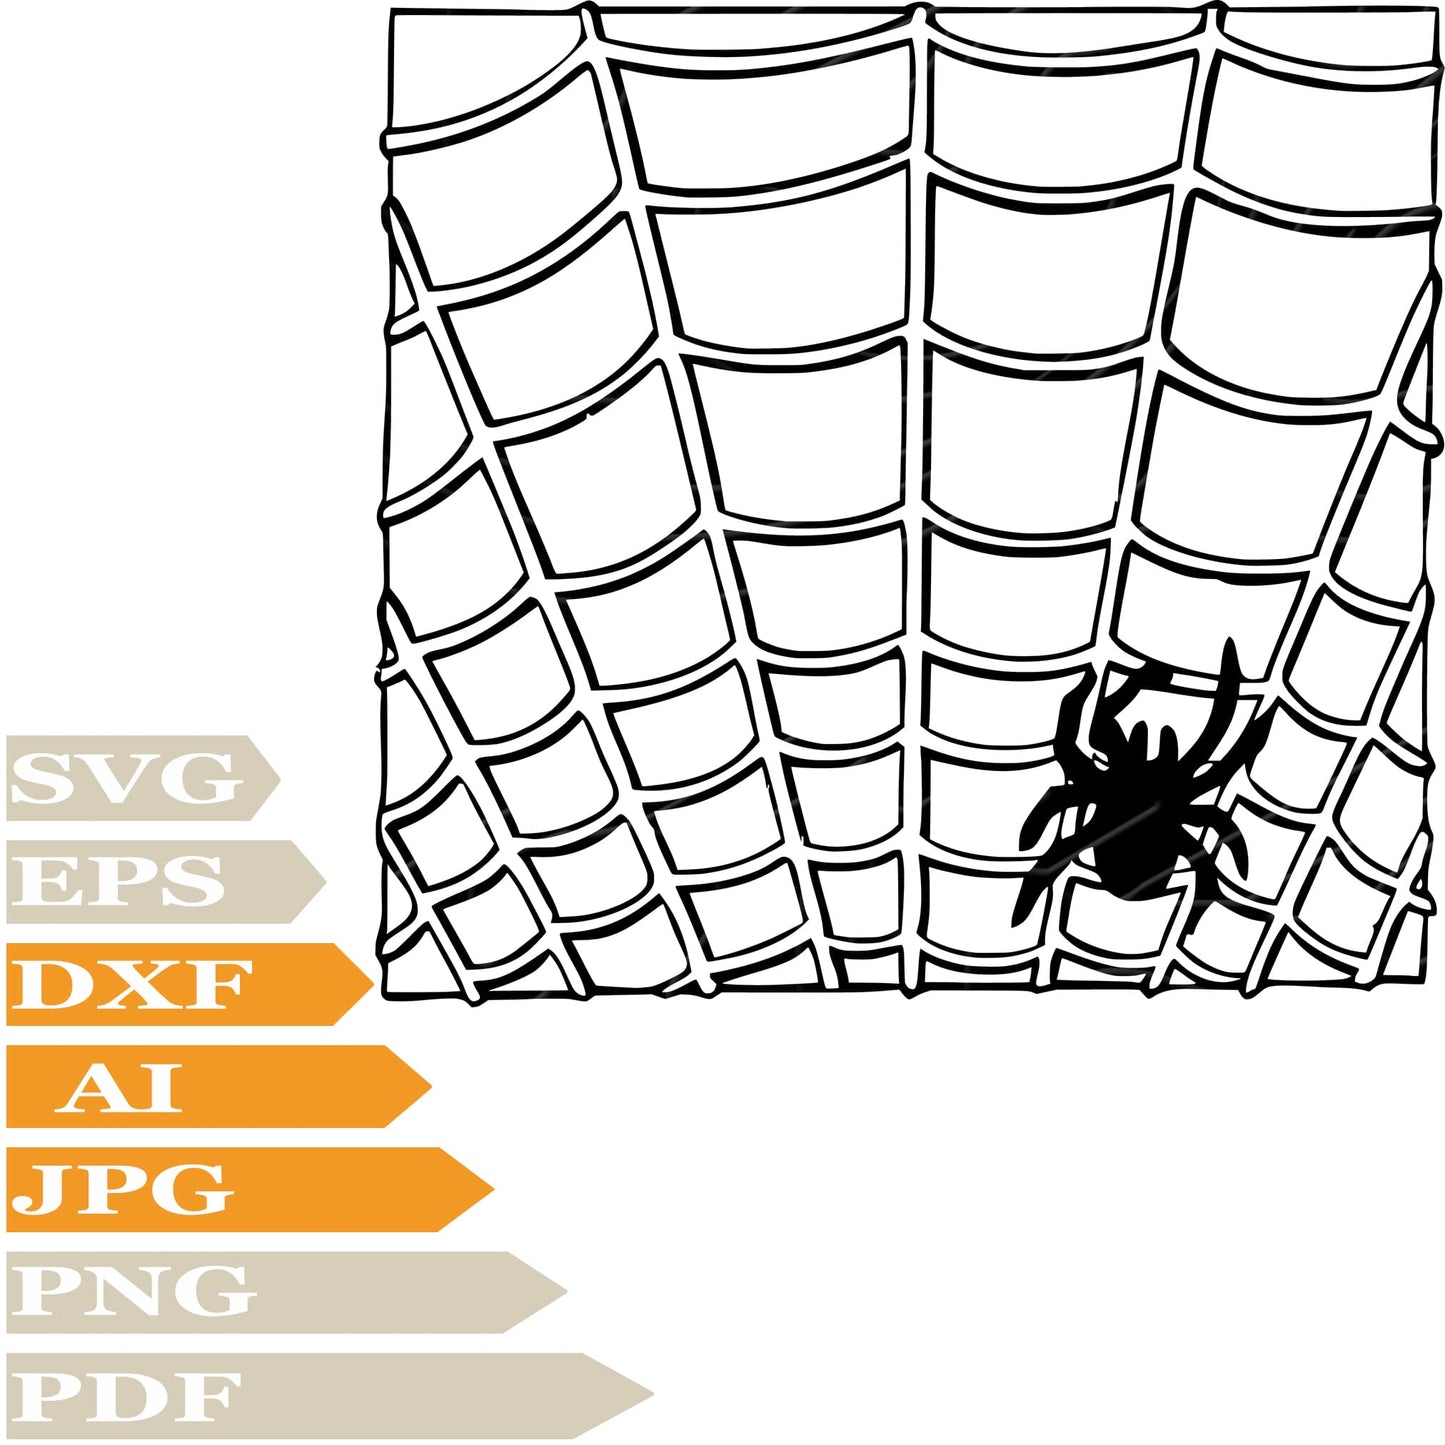 Spider SVG, Spider In The Web SVG Design, Spiderweb PNG, Spider Vector Graphics, Spider For Cricut, Digital Instant Download, Clip Art, Cut File, T-Shirts, Silhouette